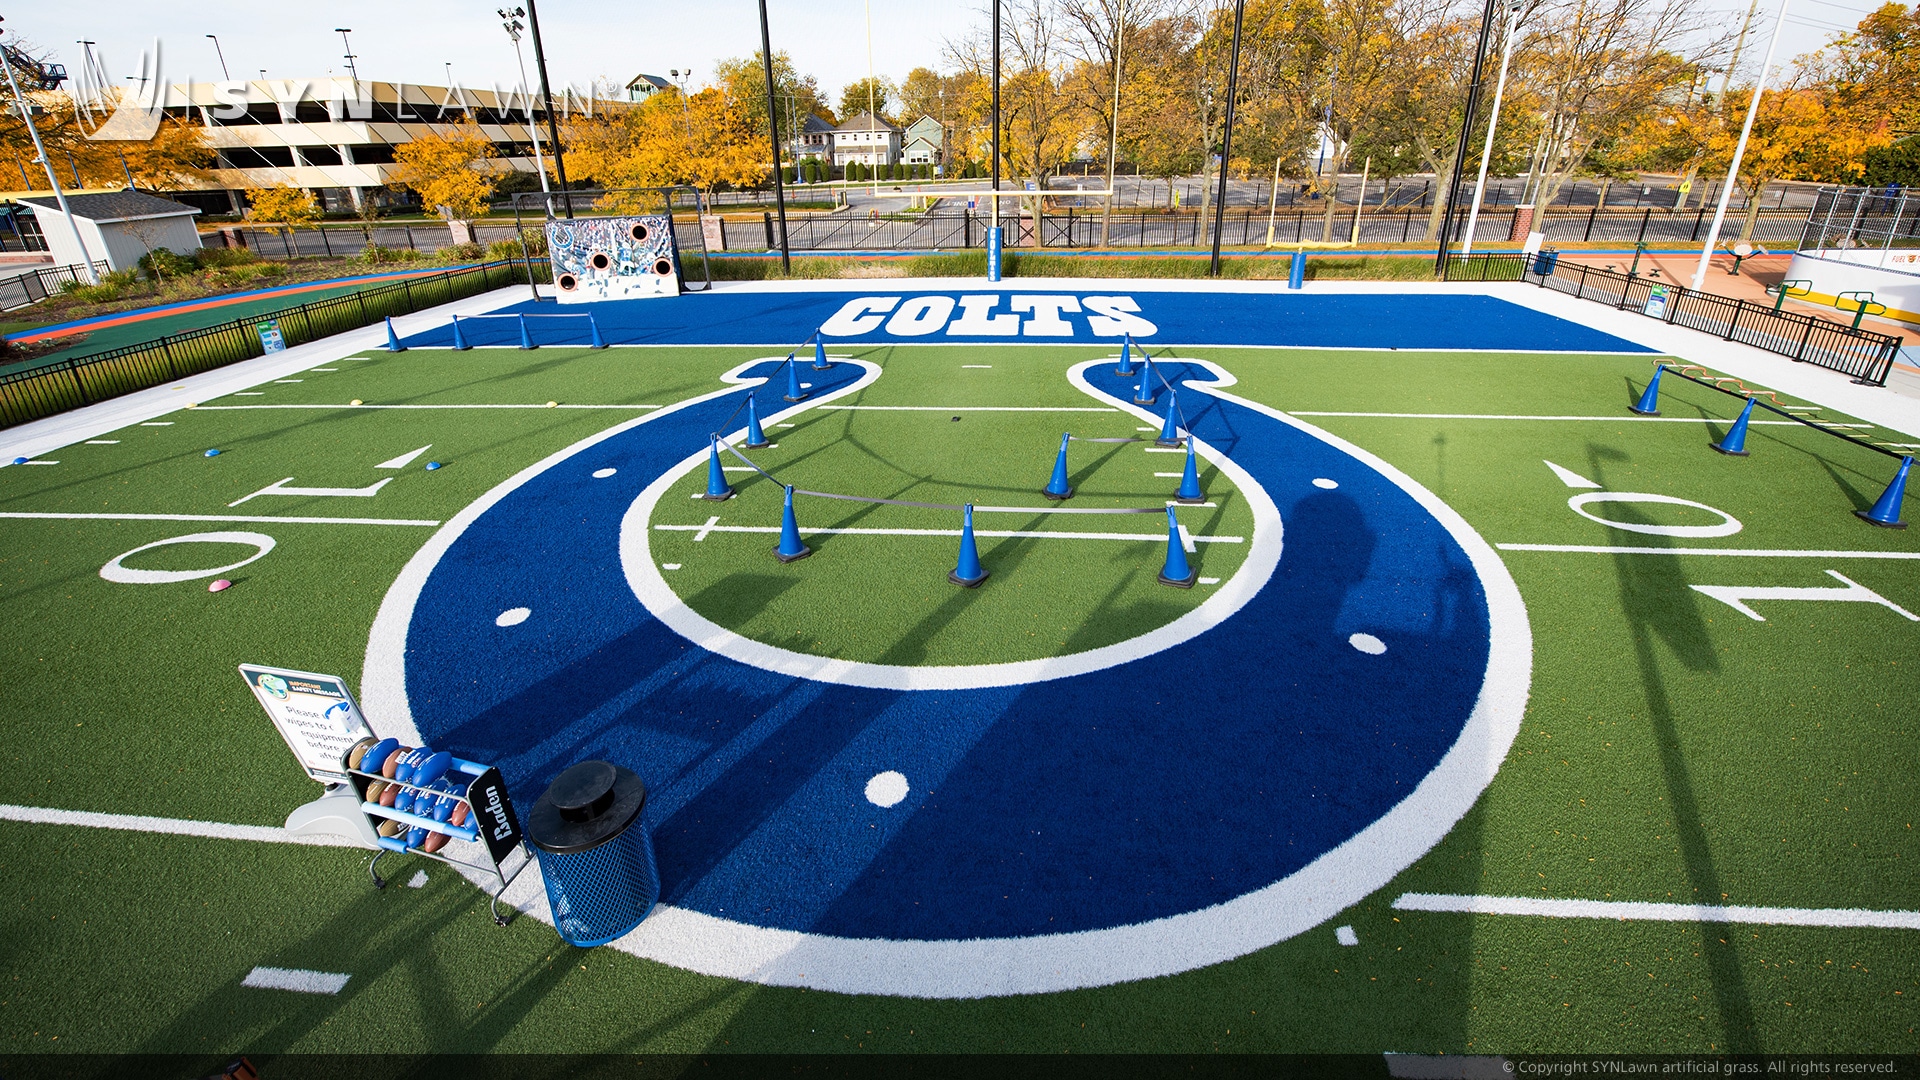 Indianapolis Colts Artificial grass football field